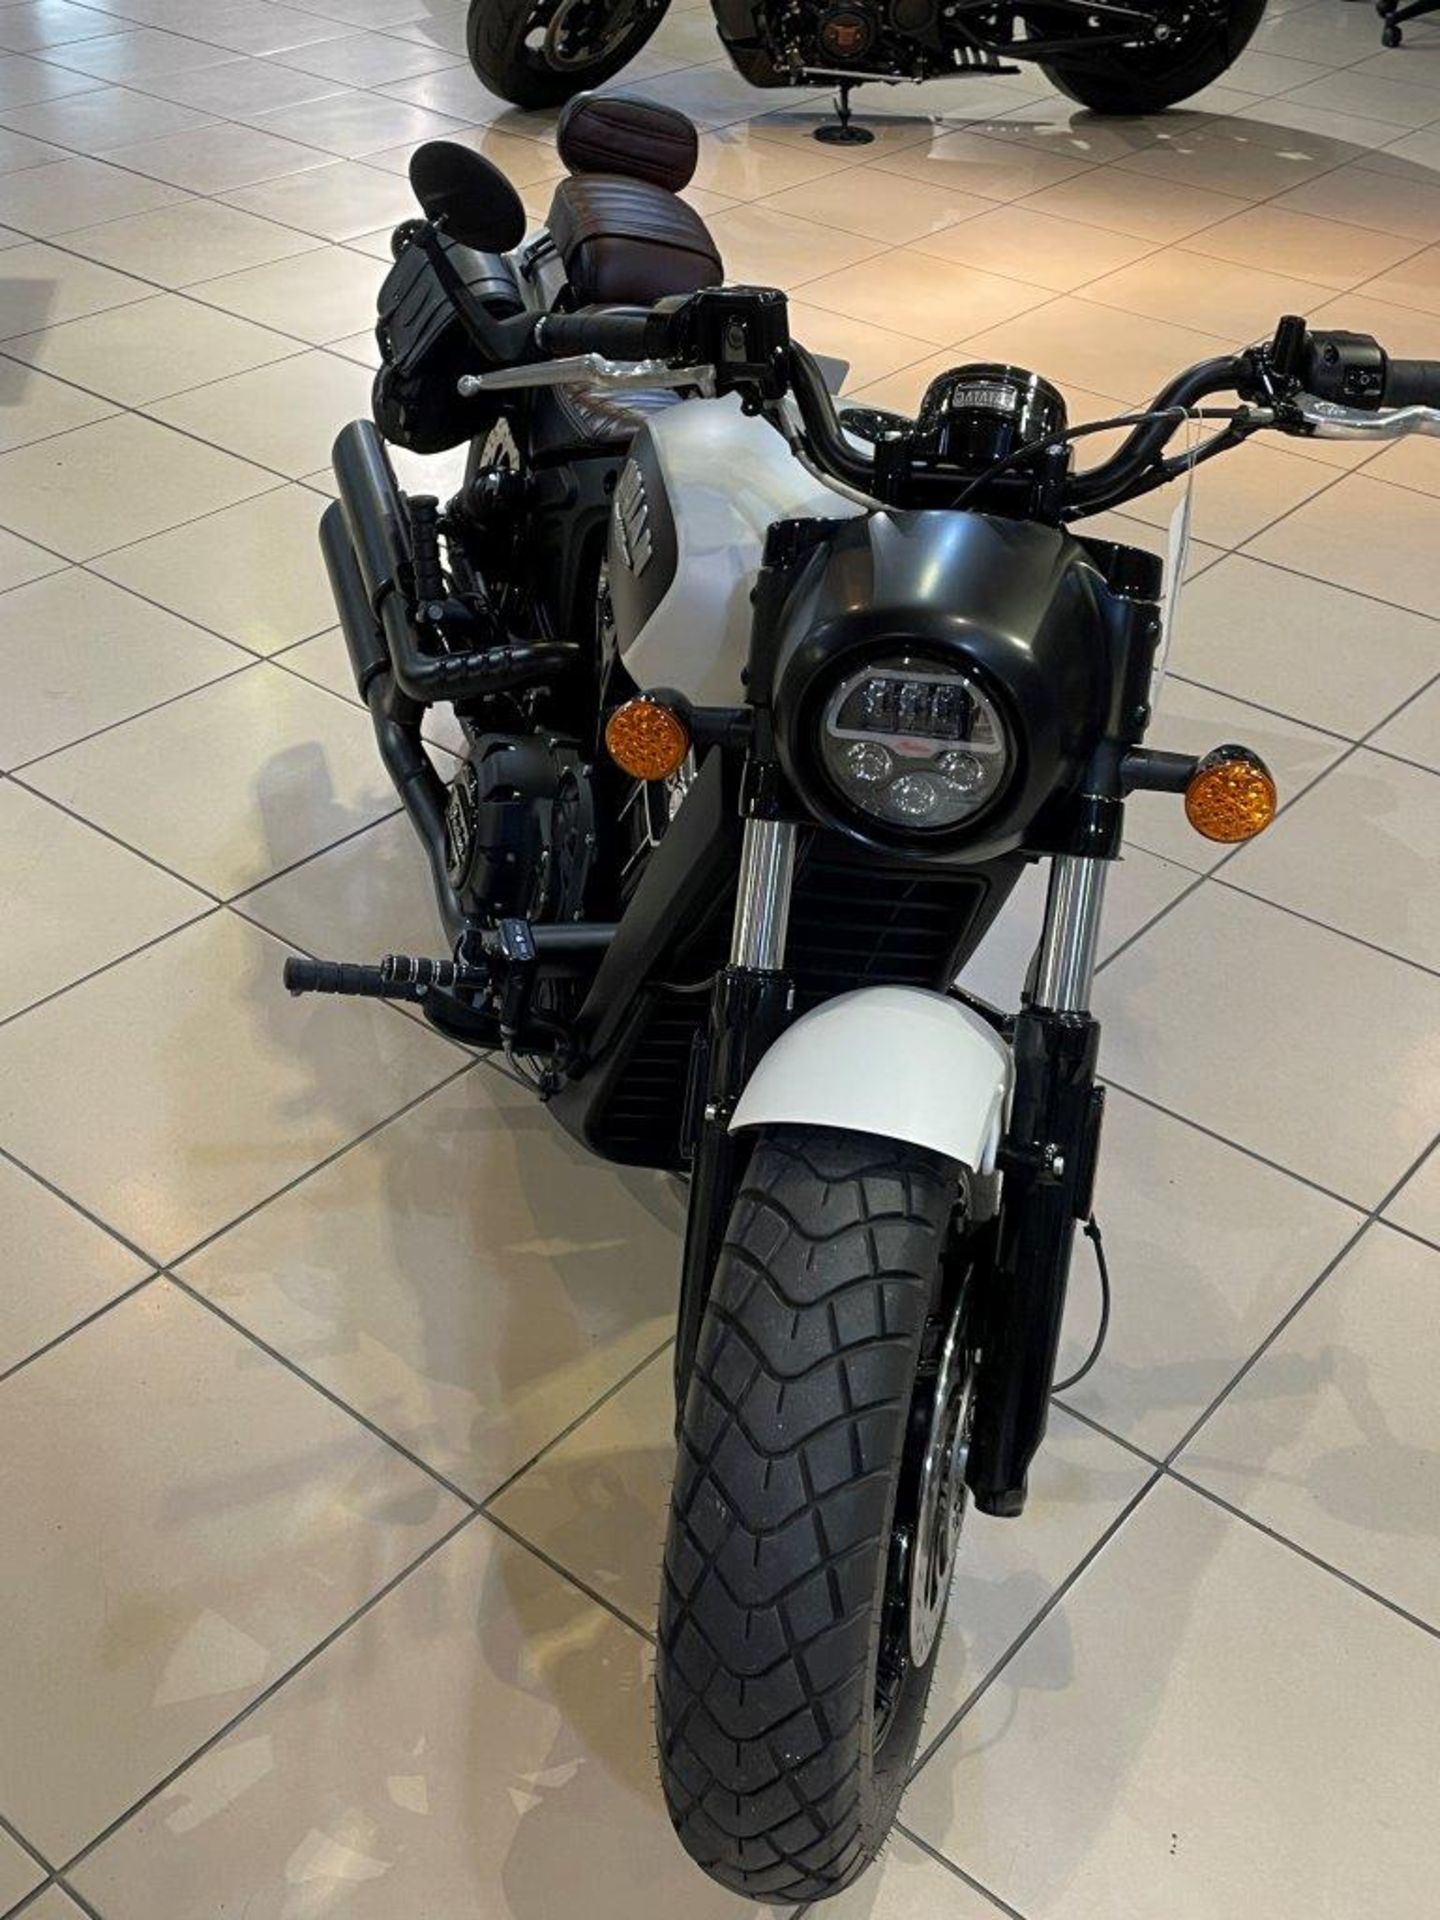 Indian Motorcycles Scout Bobber Motorbike (May 2019) - Image 6 of 18